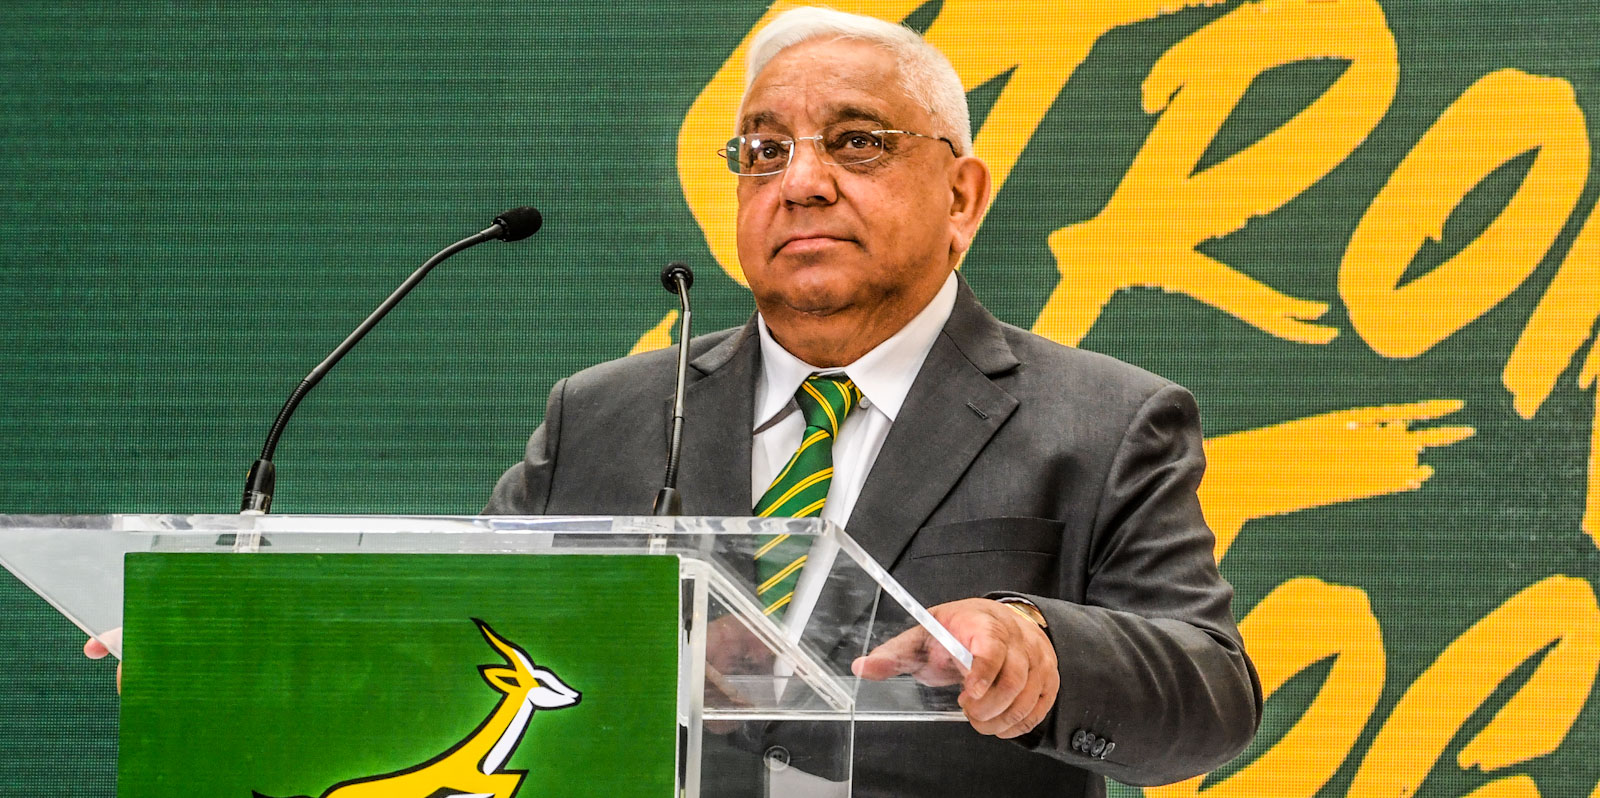 Mr Mark Alexander was re-elected as President of SA Rugby.